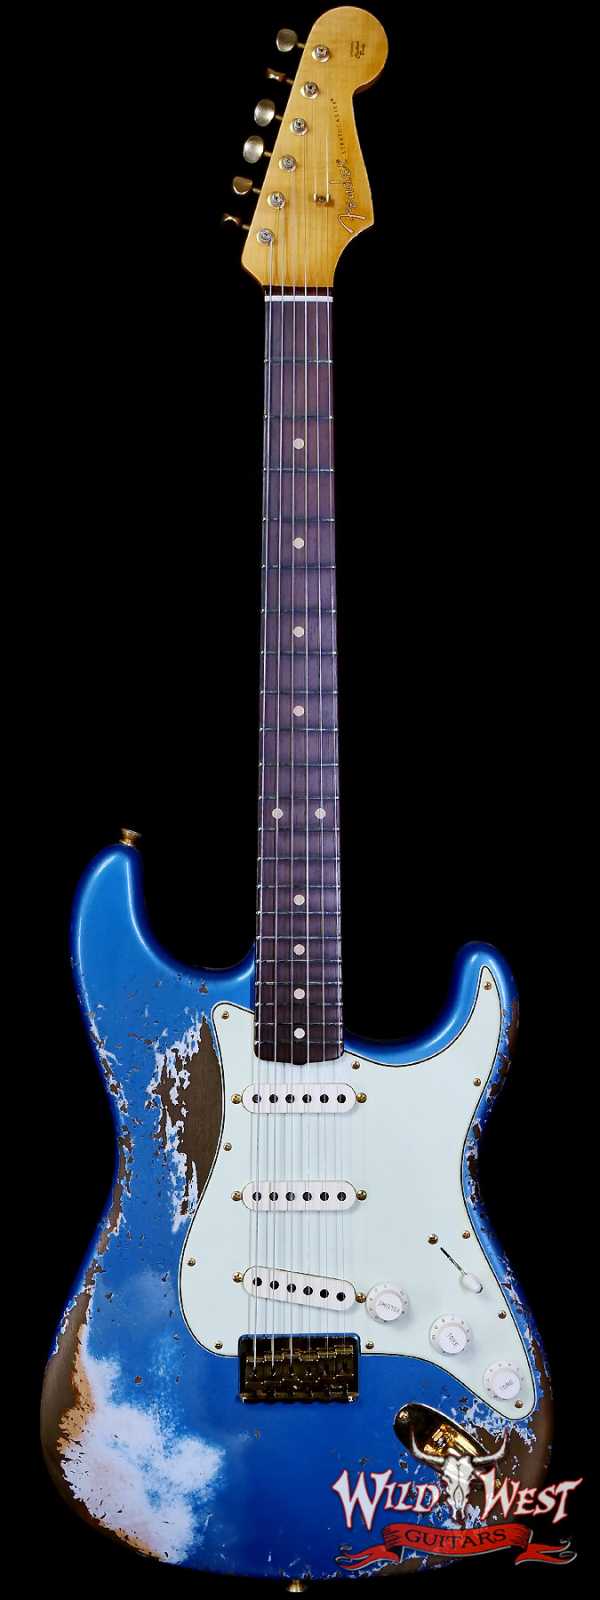 Fender Custom Shop Wild West Guitars 25th Anniversary 1960 Stratocaster Hardtail Madagascar Rosewood Fretboard Heavy Relic Lake Placid Blue 7.10 LBS